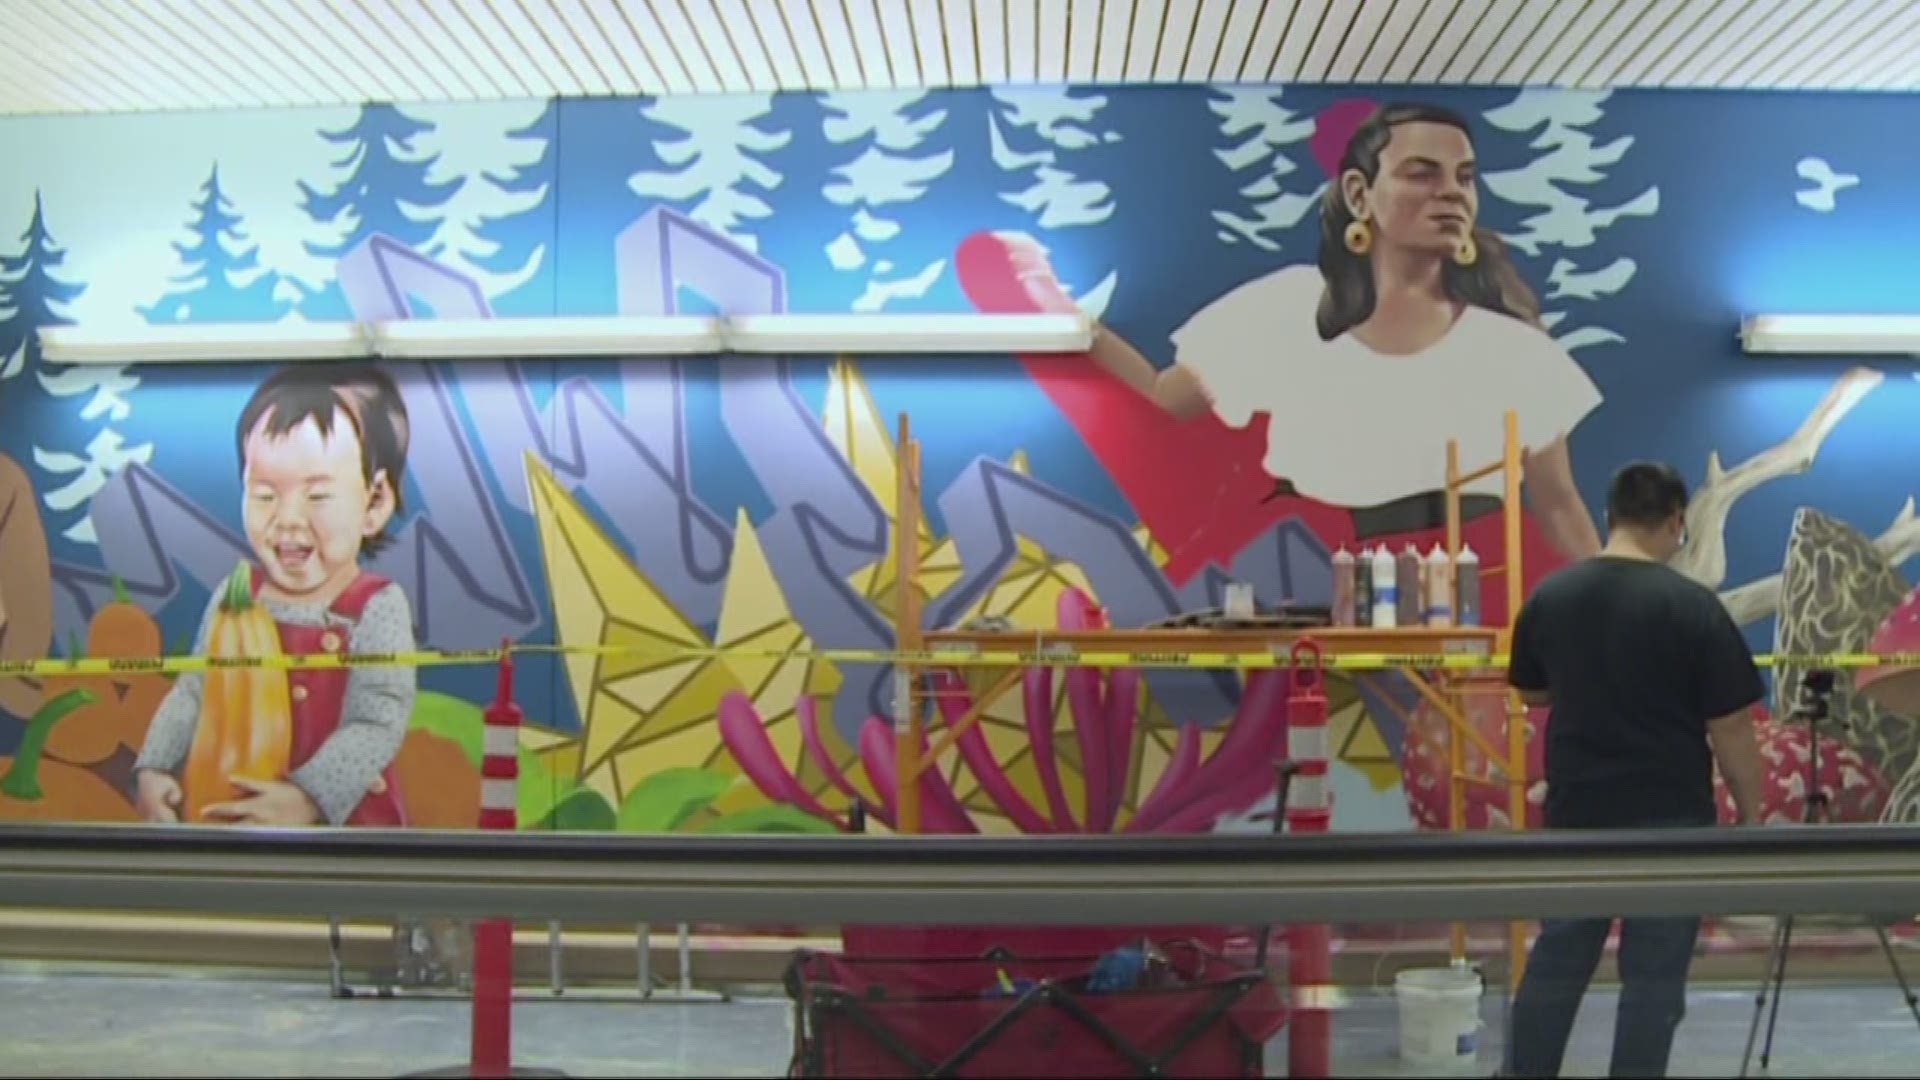 Local artists are transforming a big part of Portland International Airport. They're painting a giant mural in the north pedestrian tunnel, covering 150 feet of wall